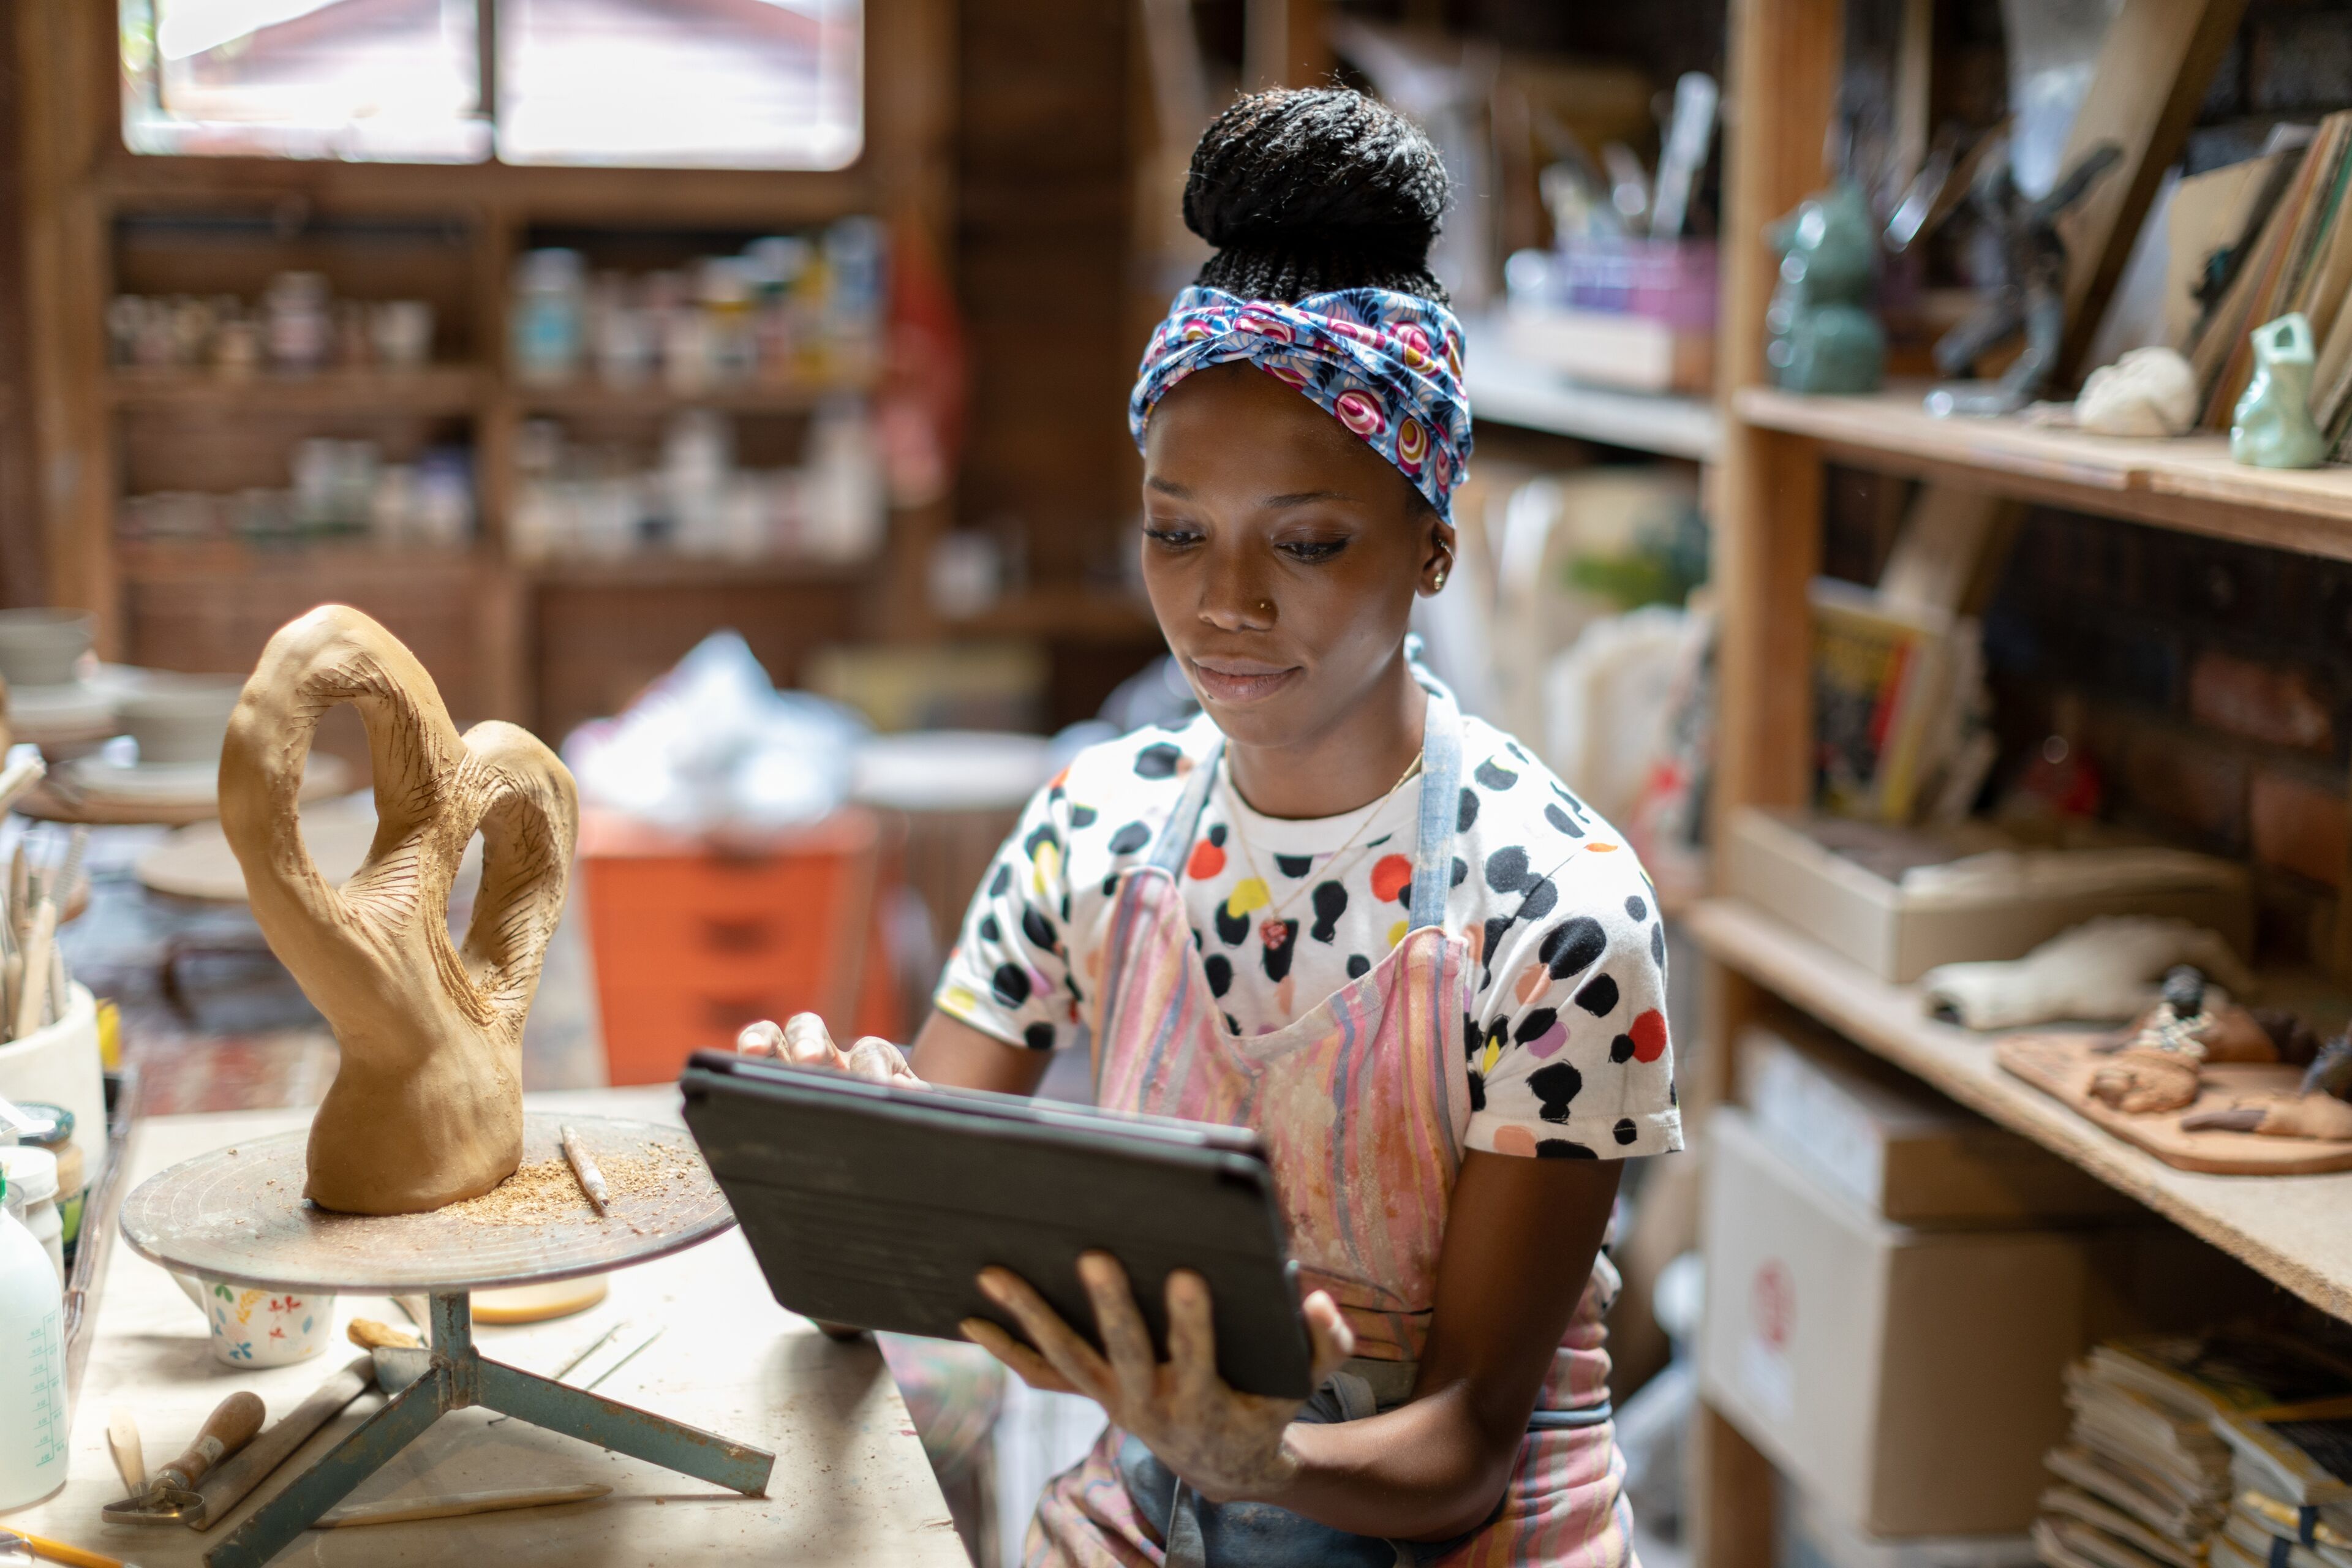 A focused female potter reviews a digital tablet, with her clay sculpture in the foreground, in a cozy, tool-filled workshop.